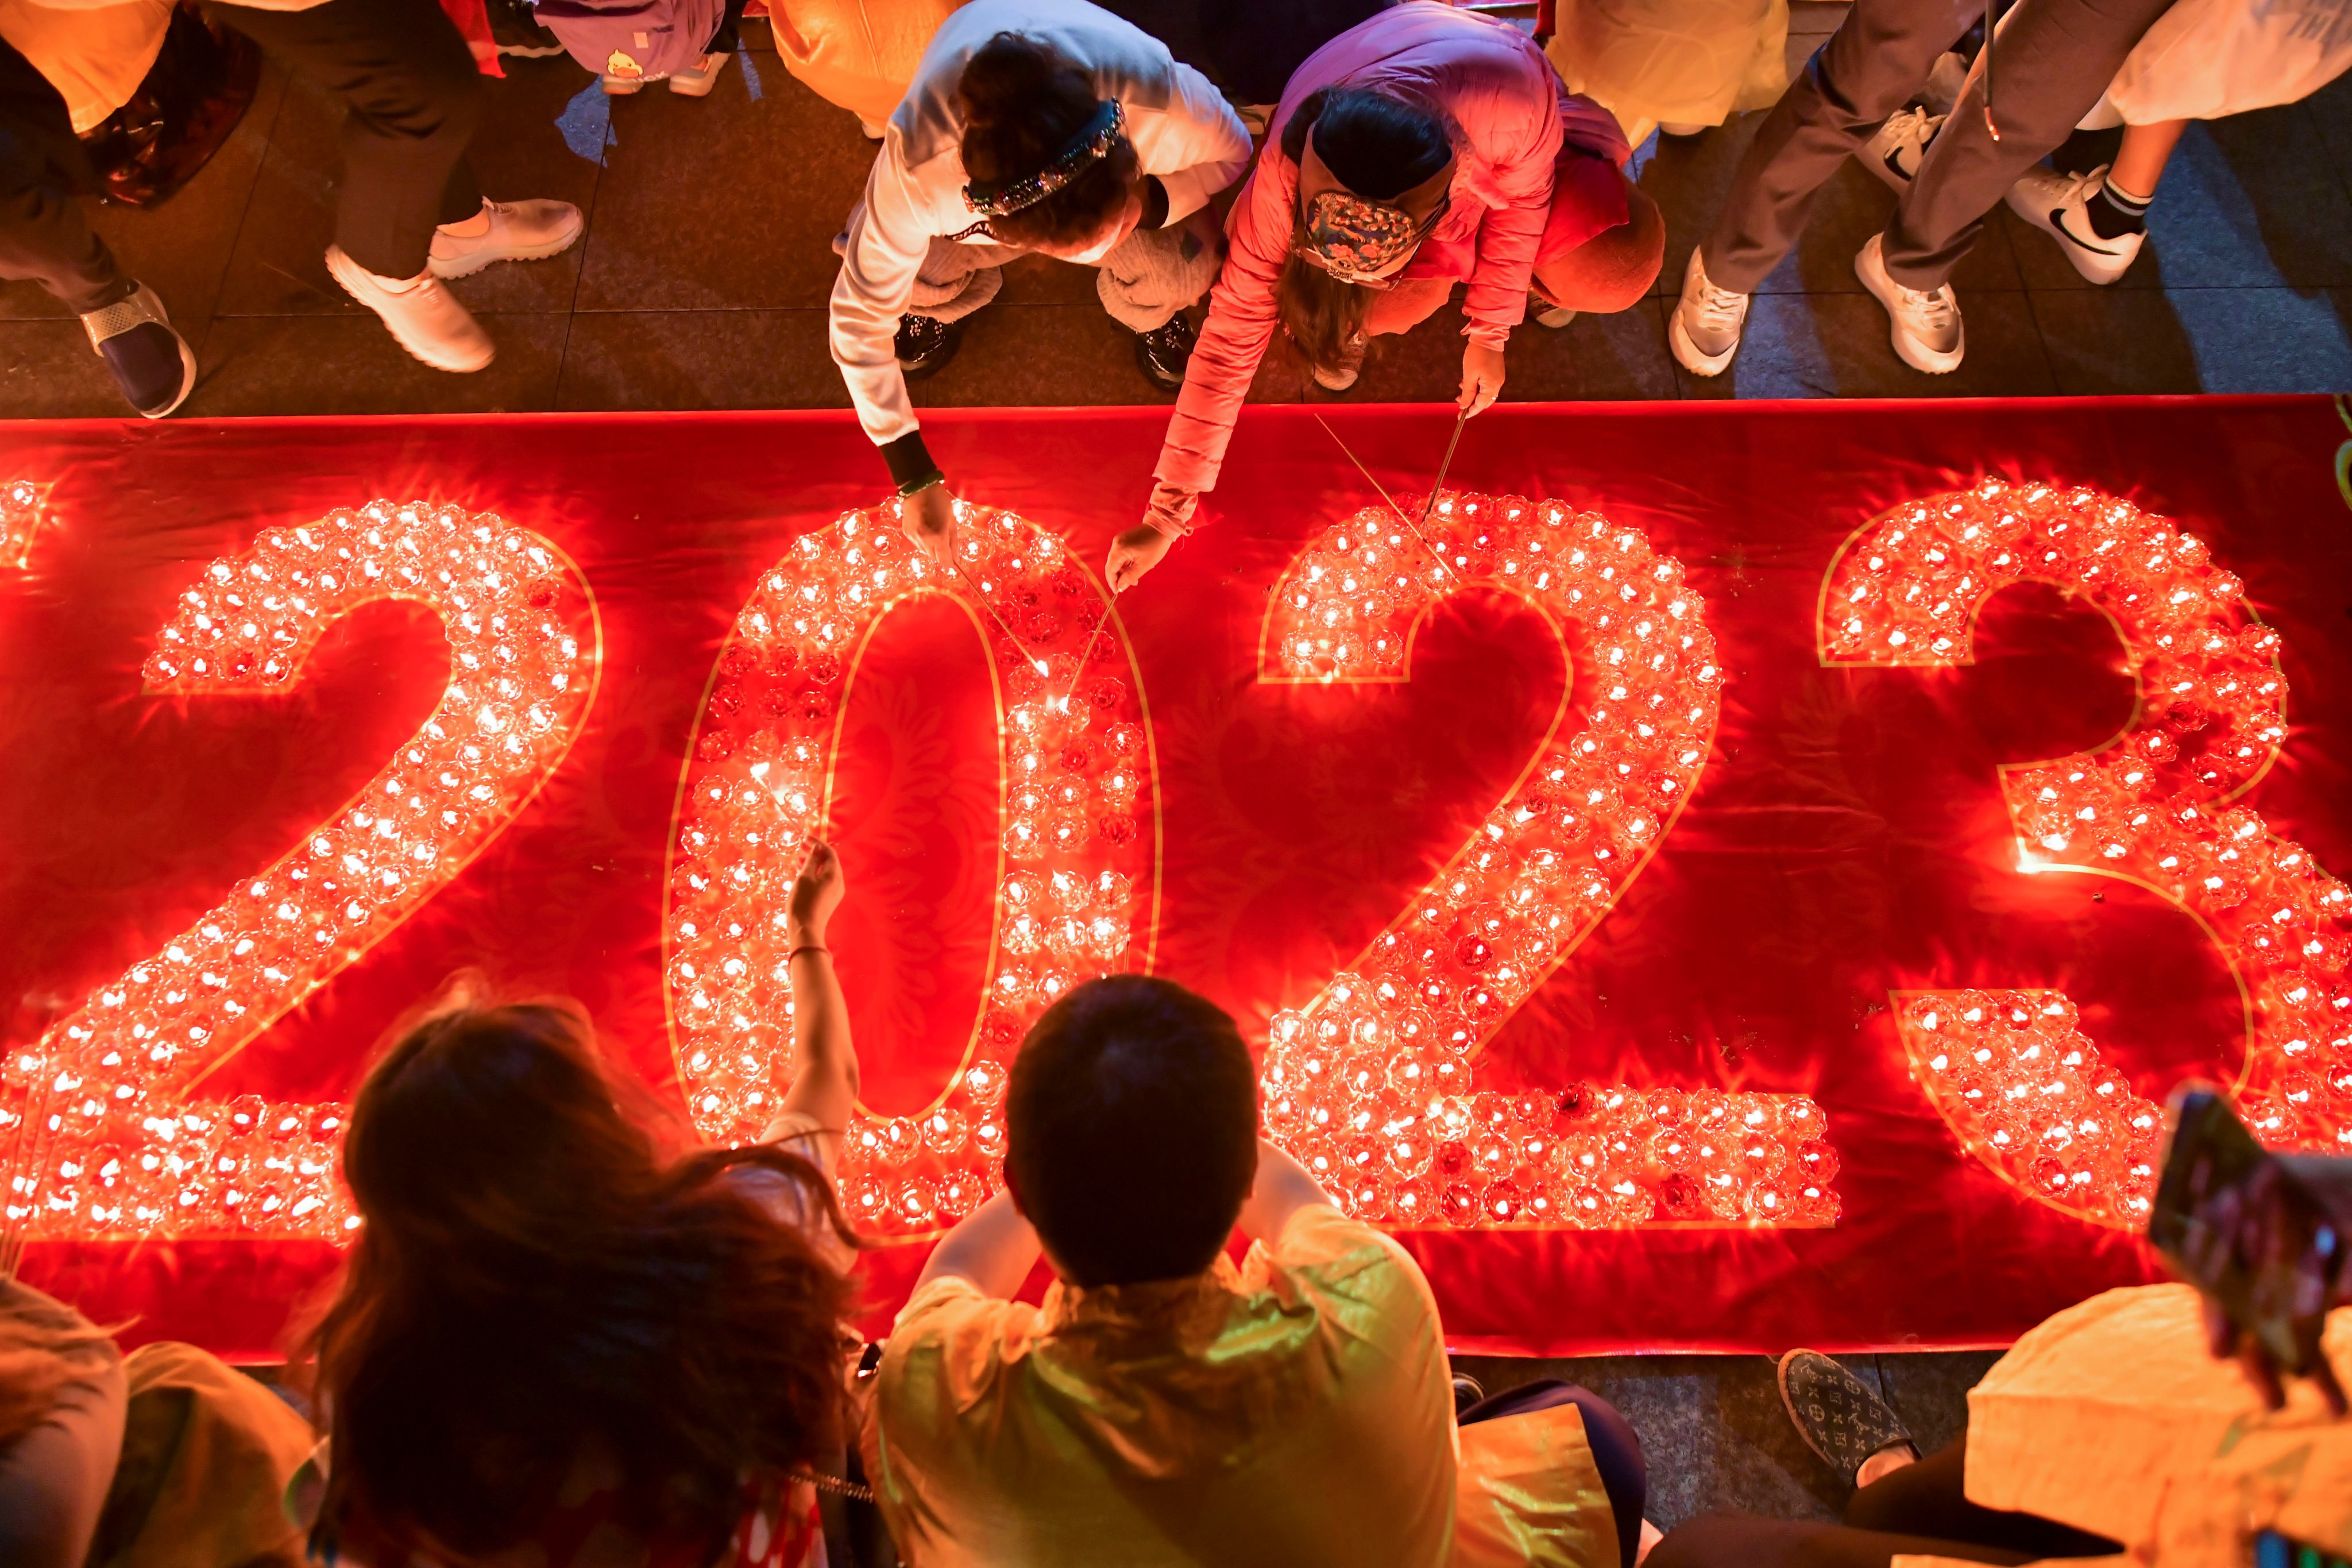 People light candles  to greet New Year’s Day on December 31, 2022 in Sanya, Hainan province, China. Photo: Getty Images